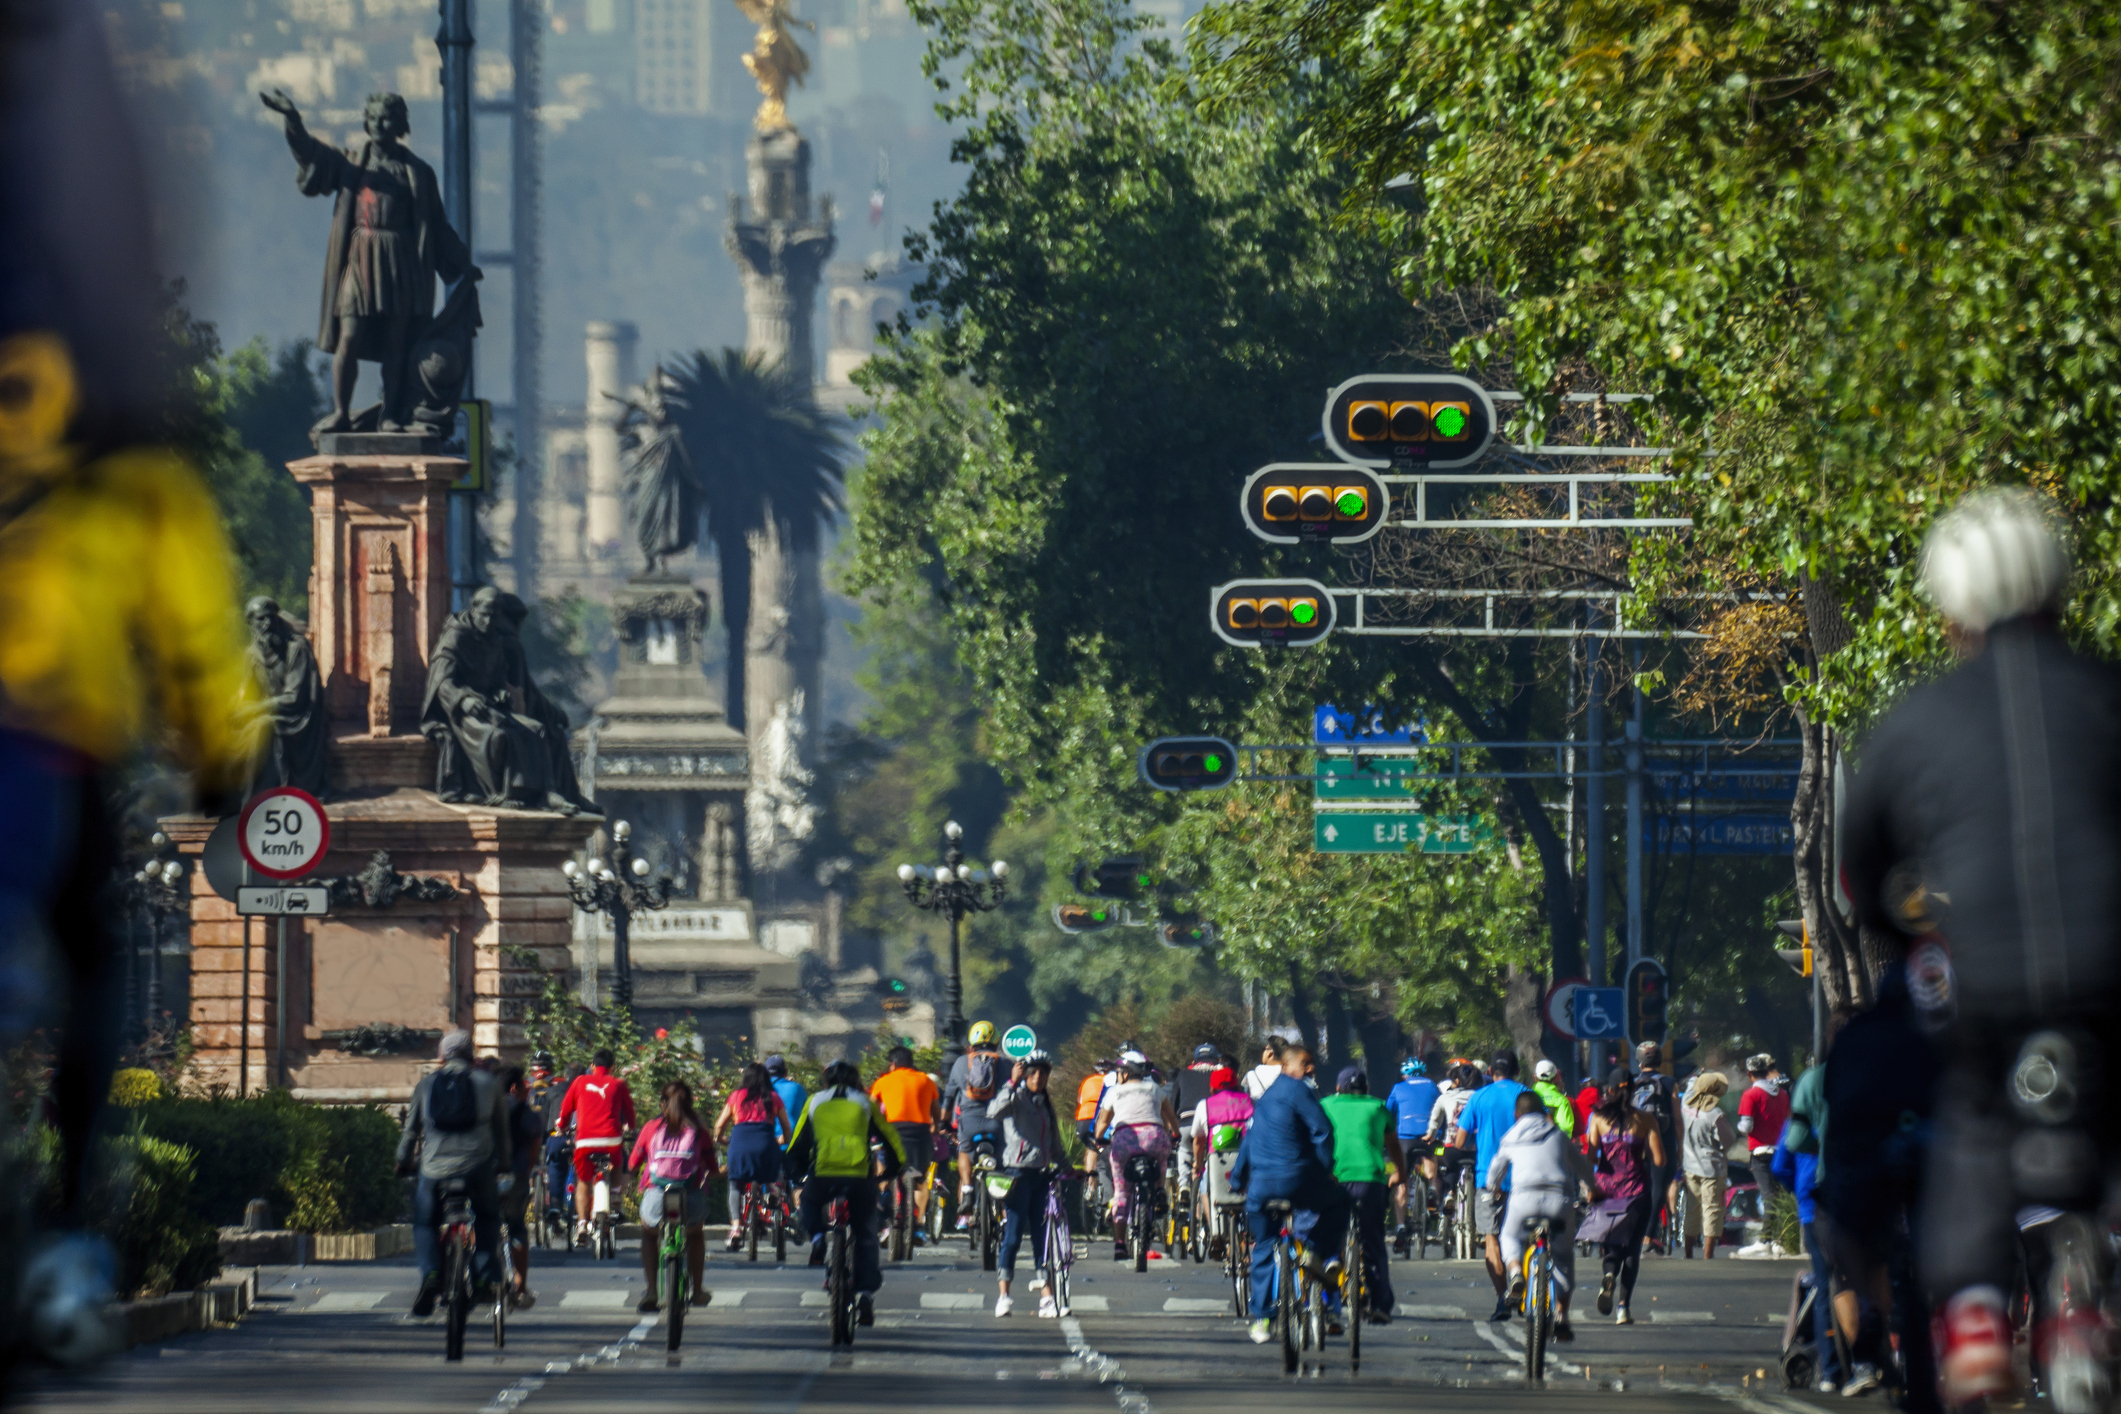 Cyclists ride on a city street with traffic lights and a statue in the background